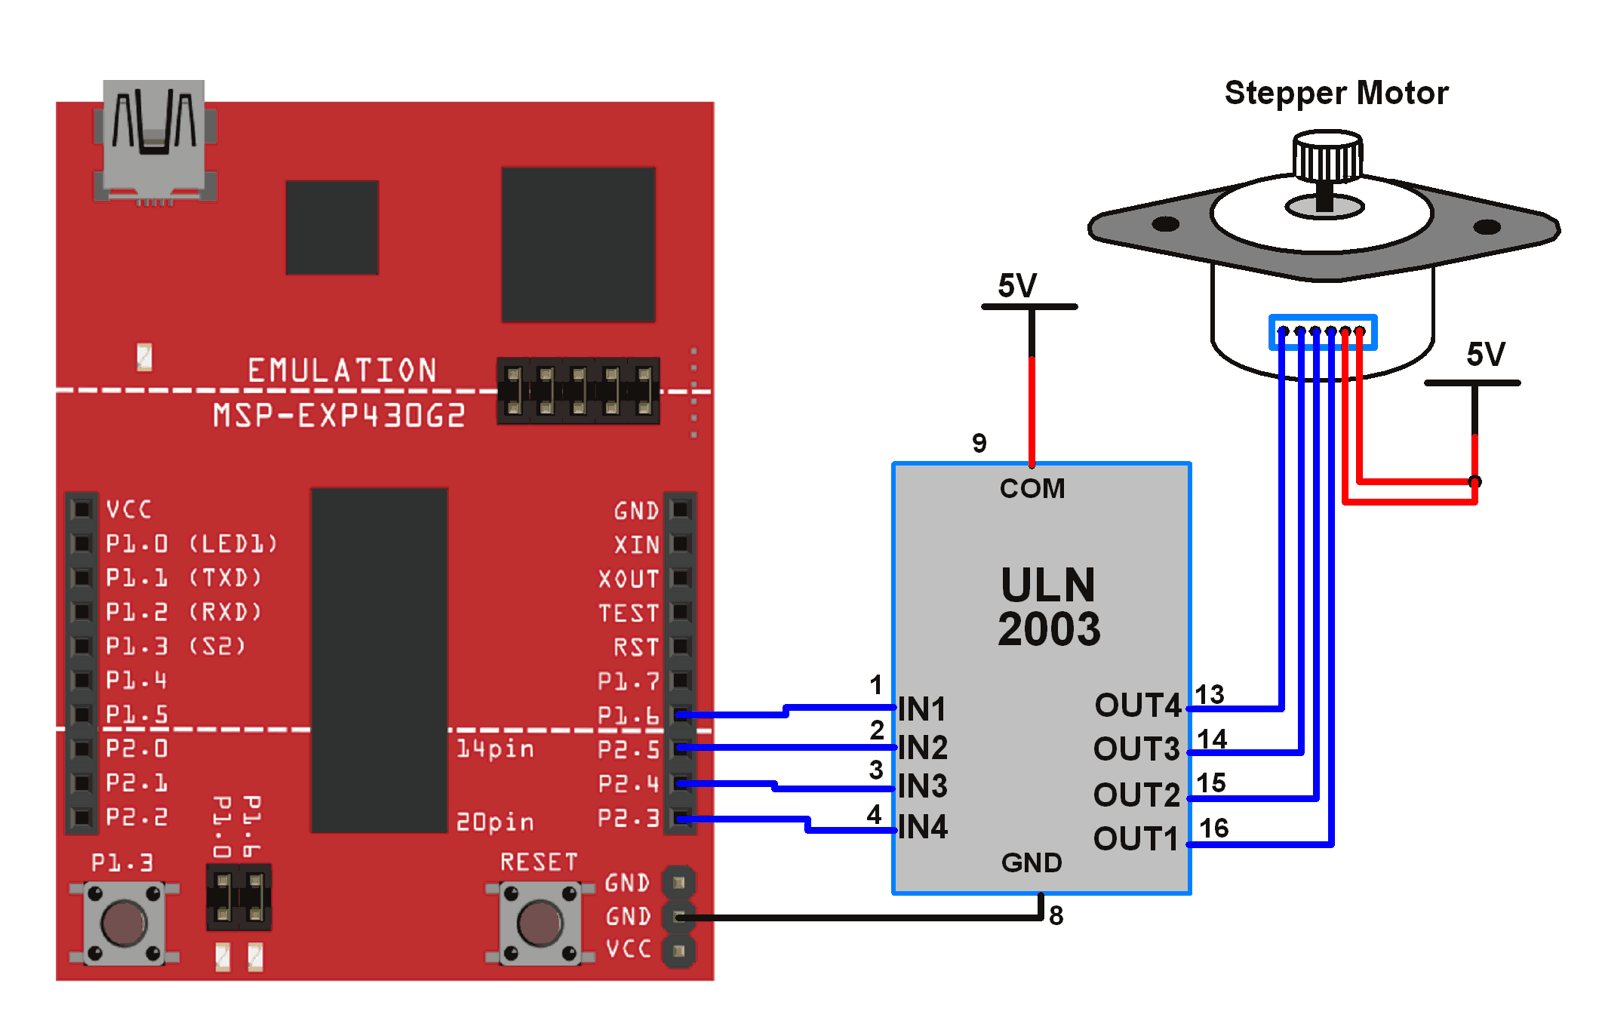 Interfacing Stepper Motor With MSP-EXP430G2 TI Launchpad